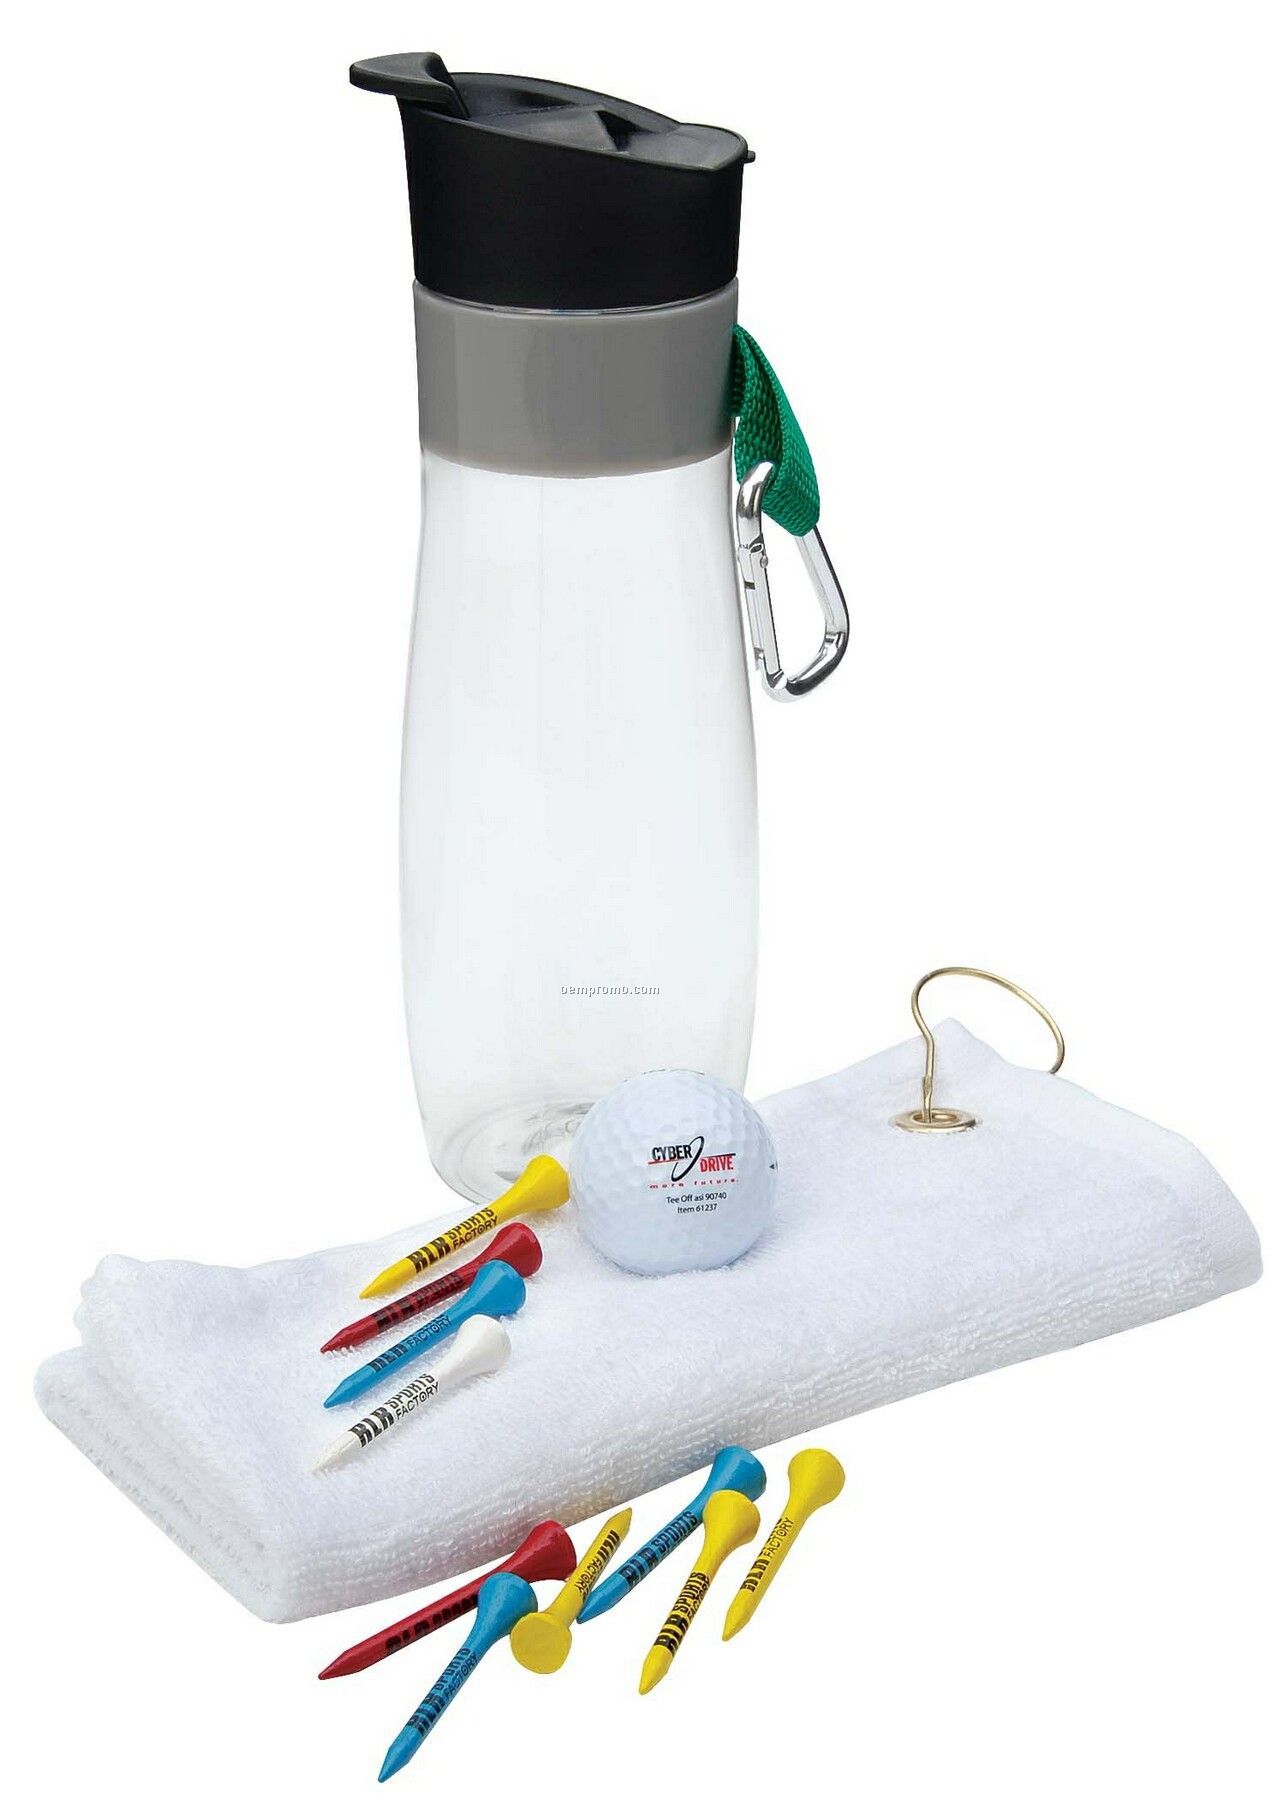 Vista Event Bottle, Titleist Dt Solo Golf Ball, Tees, And Towel Kit